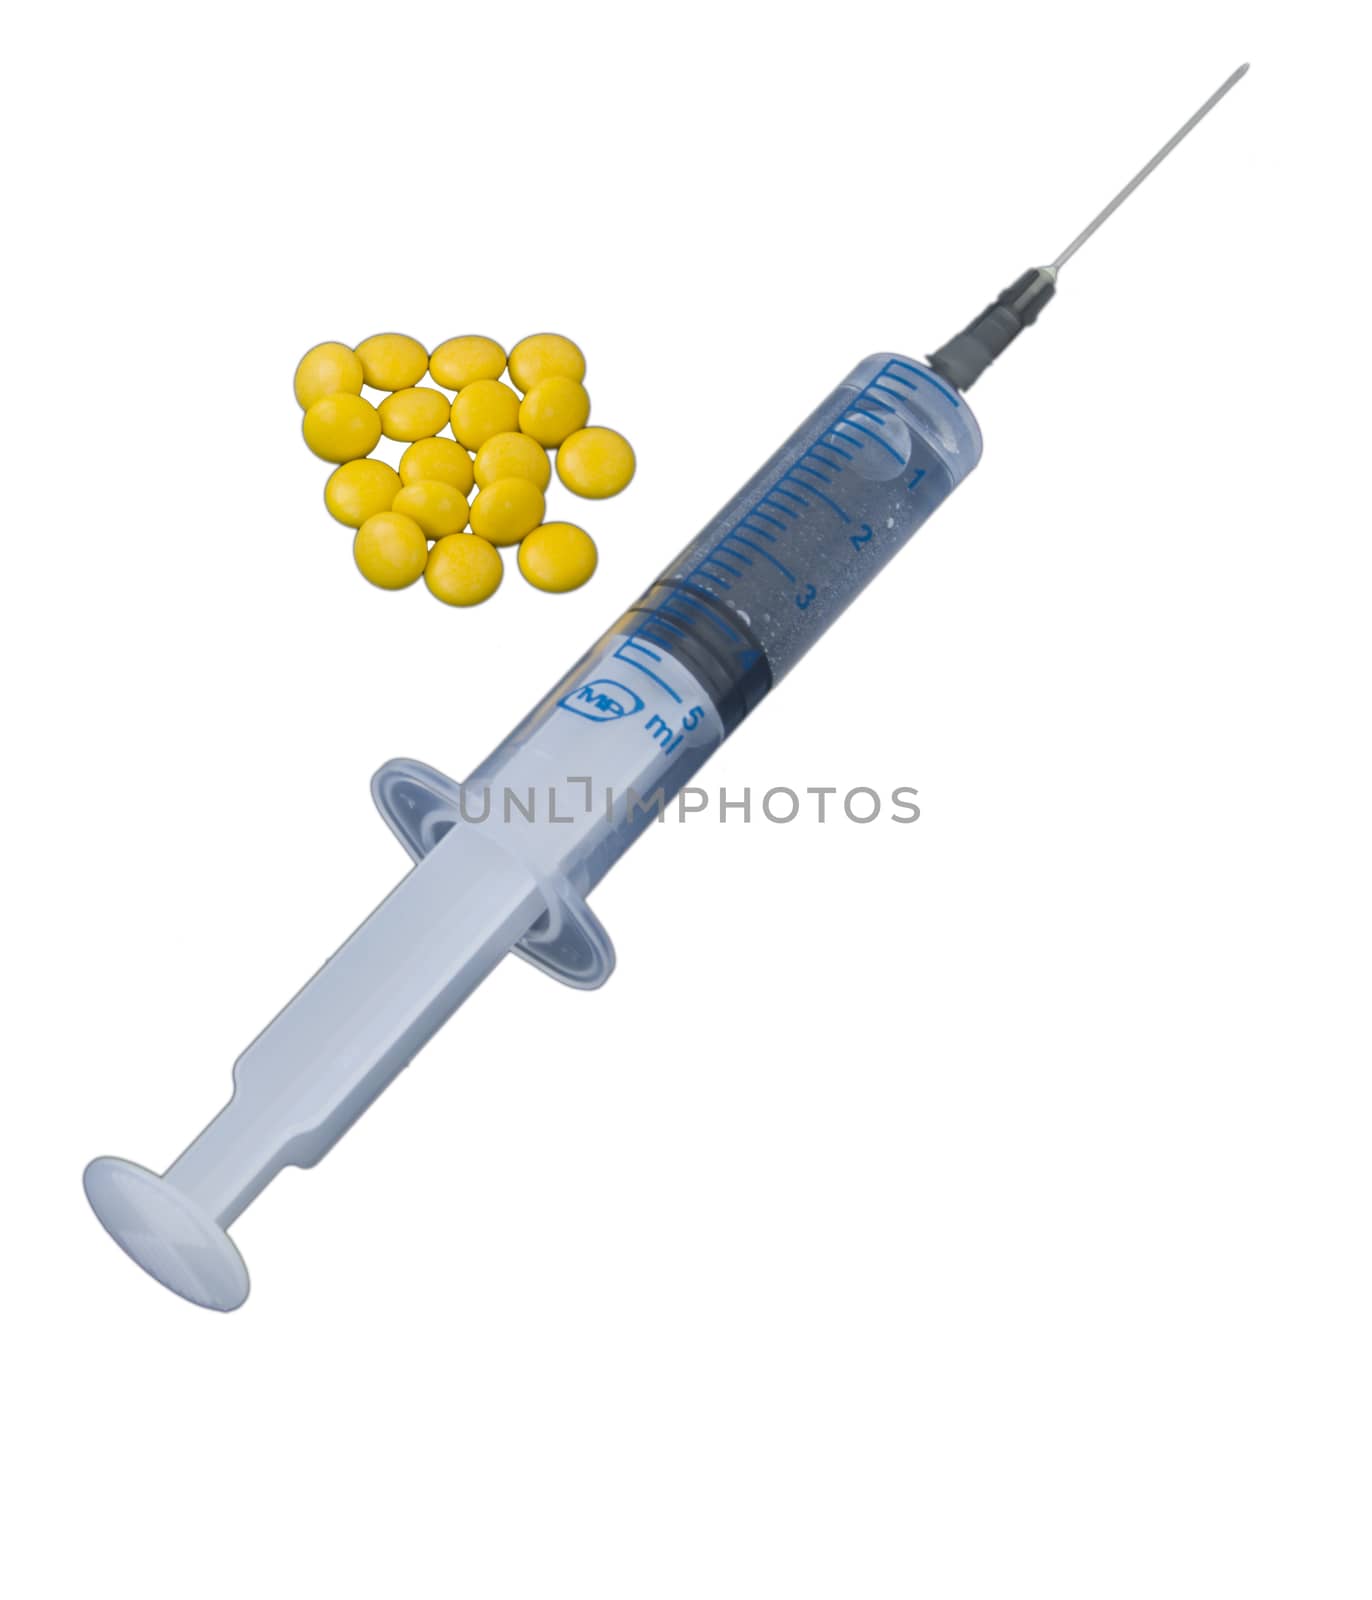 Medical syringe Isolated on white background with space for text